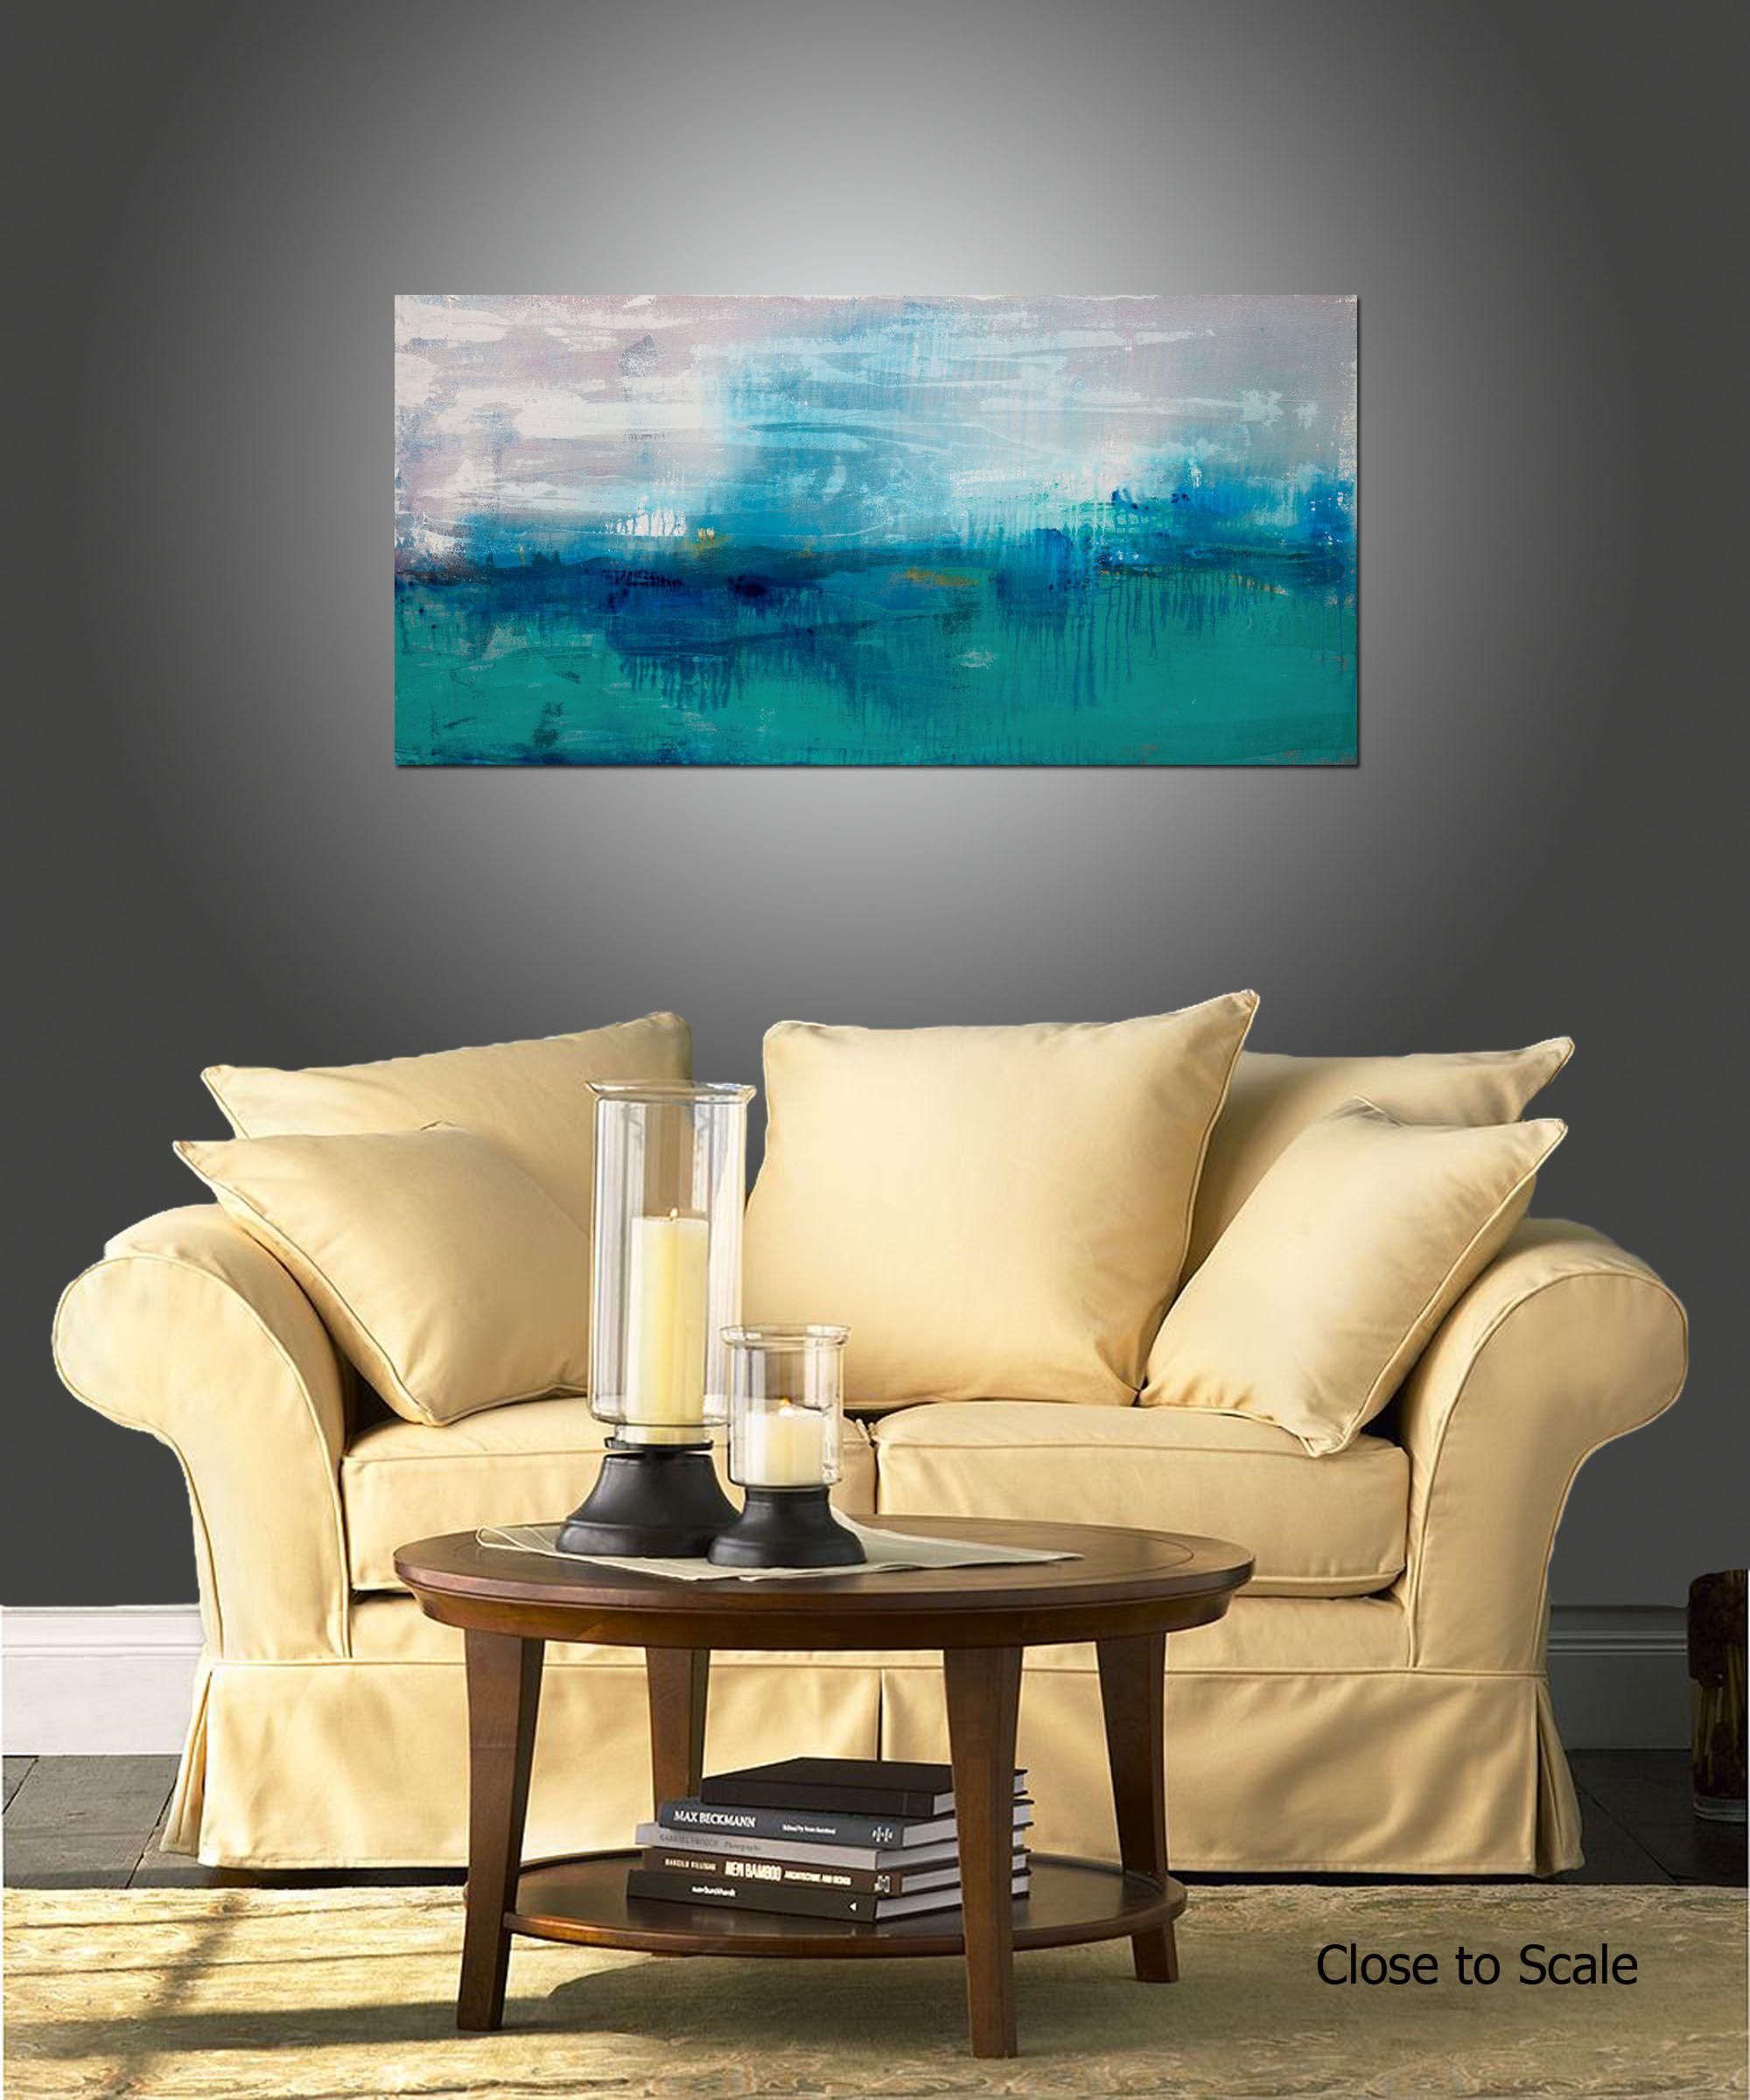 Heaven and Earth is an original painting, created with acrylic paint on gallery-wrapped canvas. It has a width of 48 inches and a height of 24 inches with a depth of 1.5 inches (24x48x1.5).     The colors used in the painting are white, blue, teal,